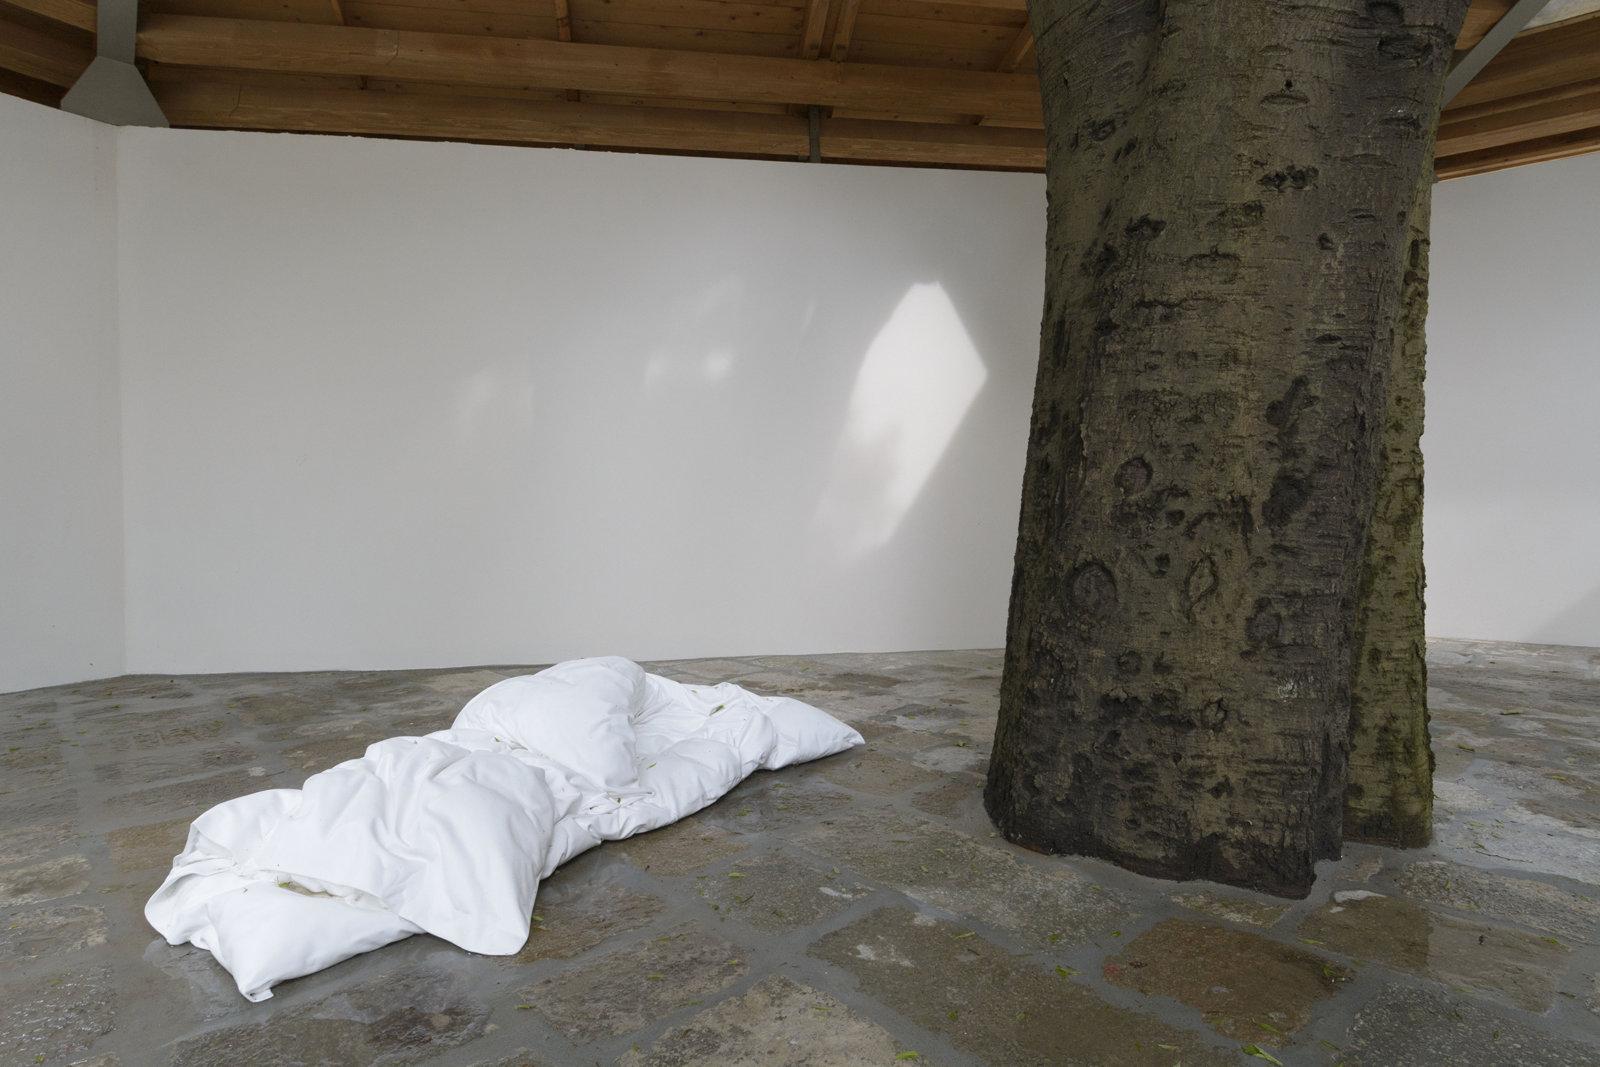 Geoffrey Farmer, Duvet, 2017, cast aluminum, waterworks, 28 x 47 x 79 in. (70 x 120 x 200 cm). Installation view, A way out of the mirror, Canada Pavilion, 57th Venice Biennale, Venice, Italy